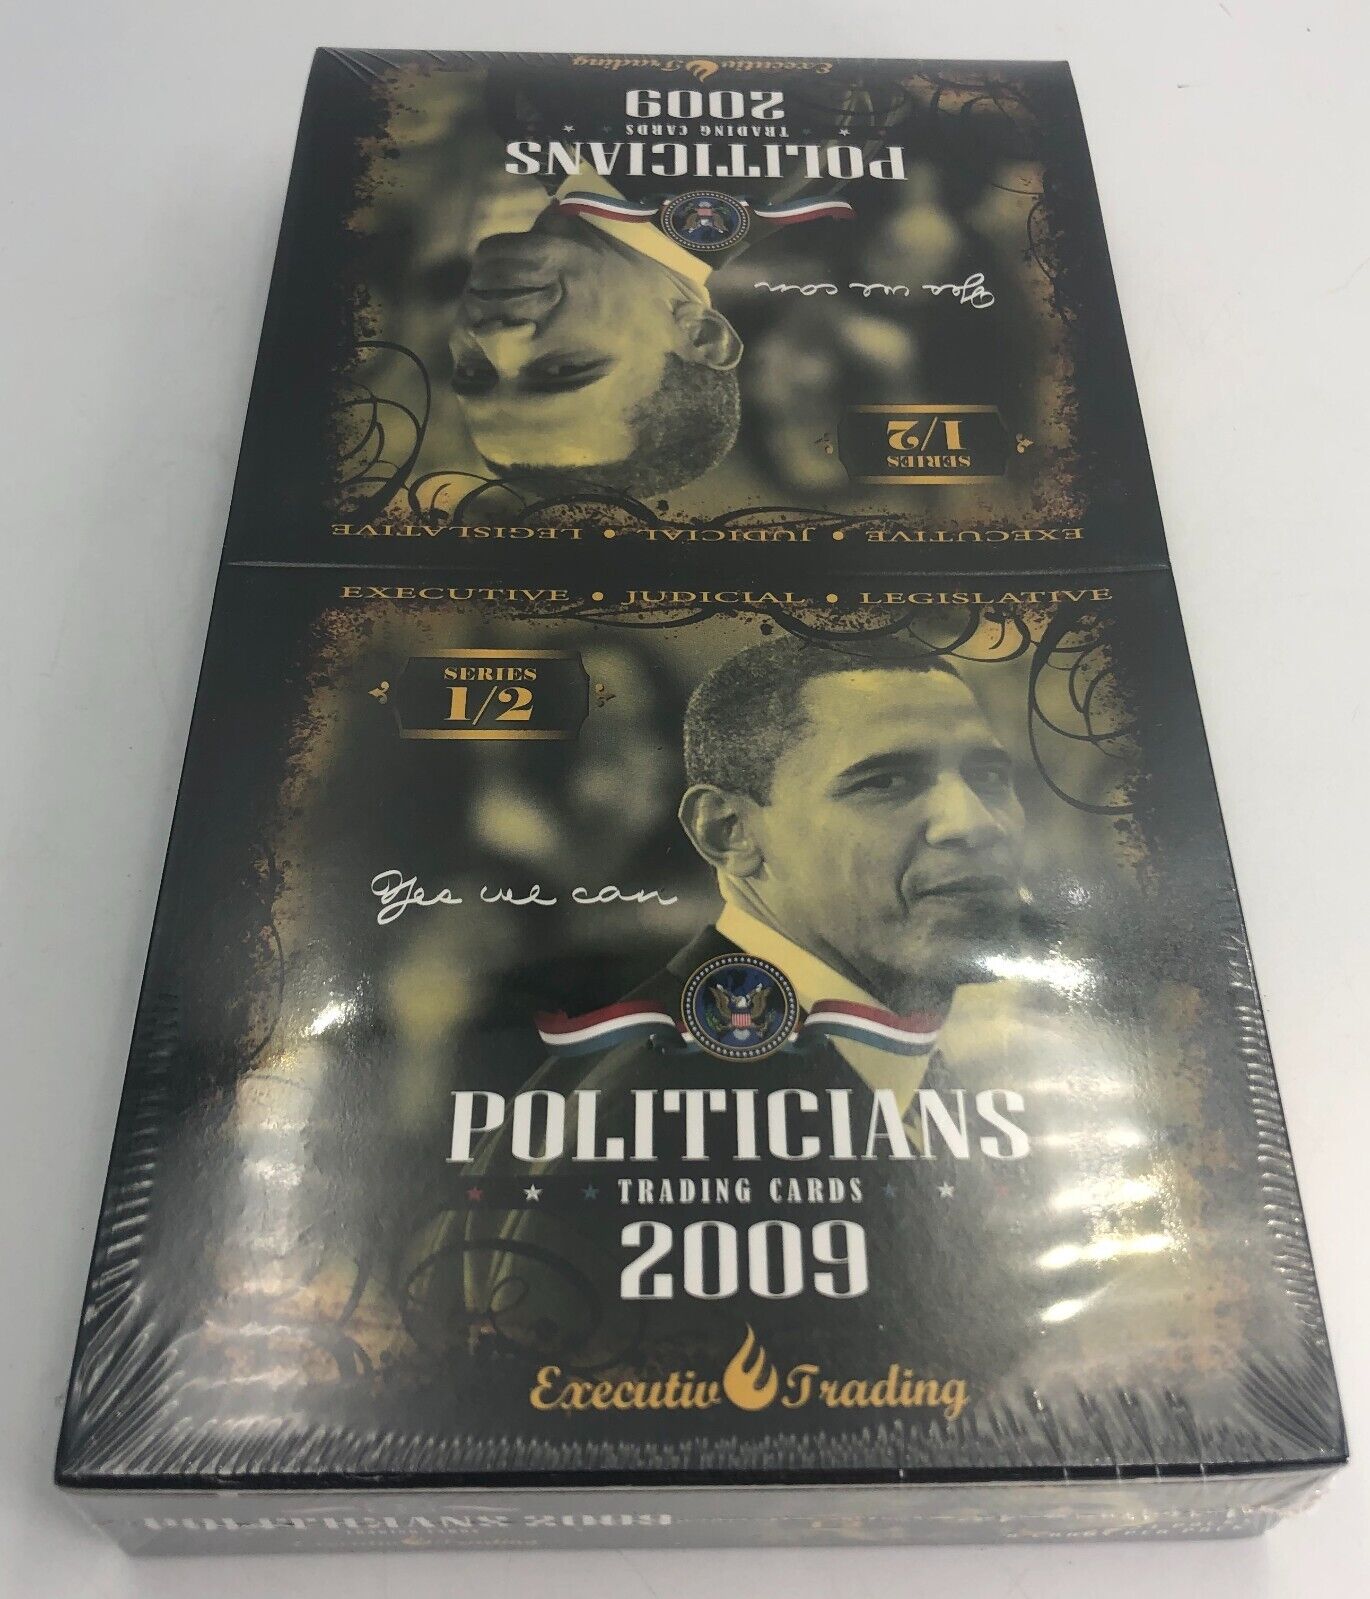 Politicians 2009 Executive Trading Cards Political Sealed Unopened Pack Box 24ct